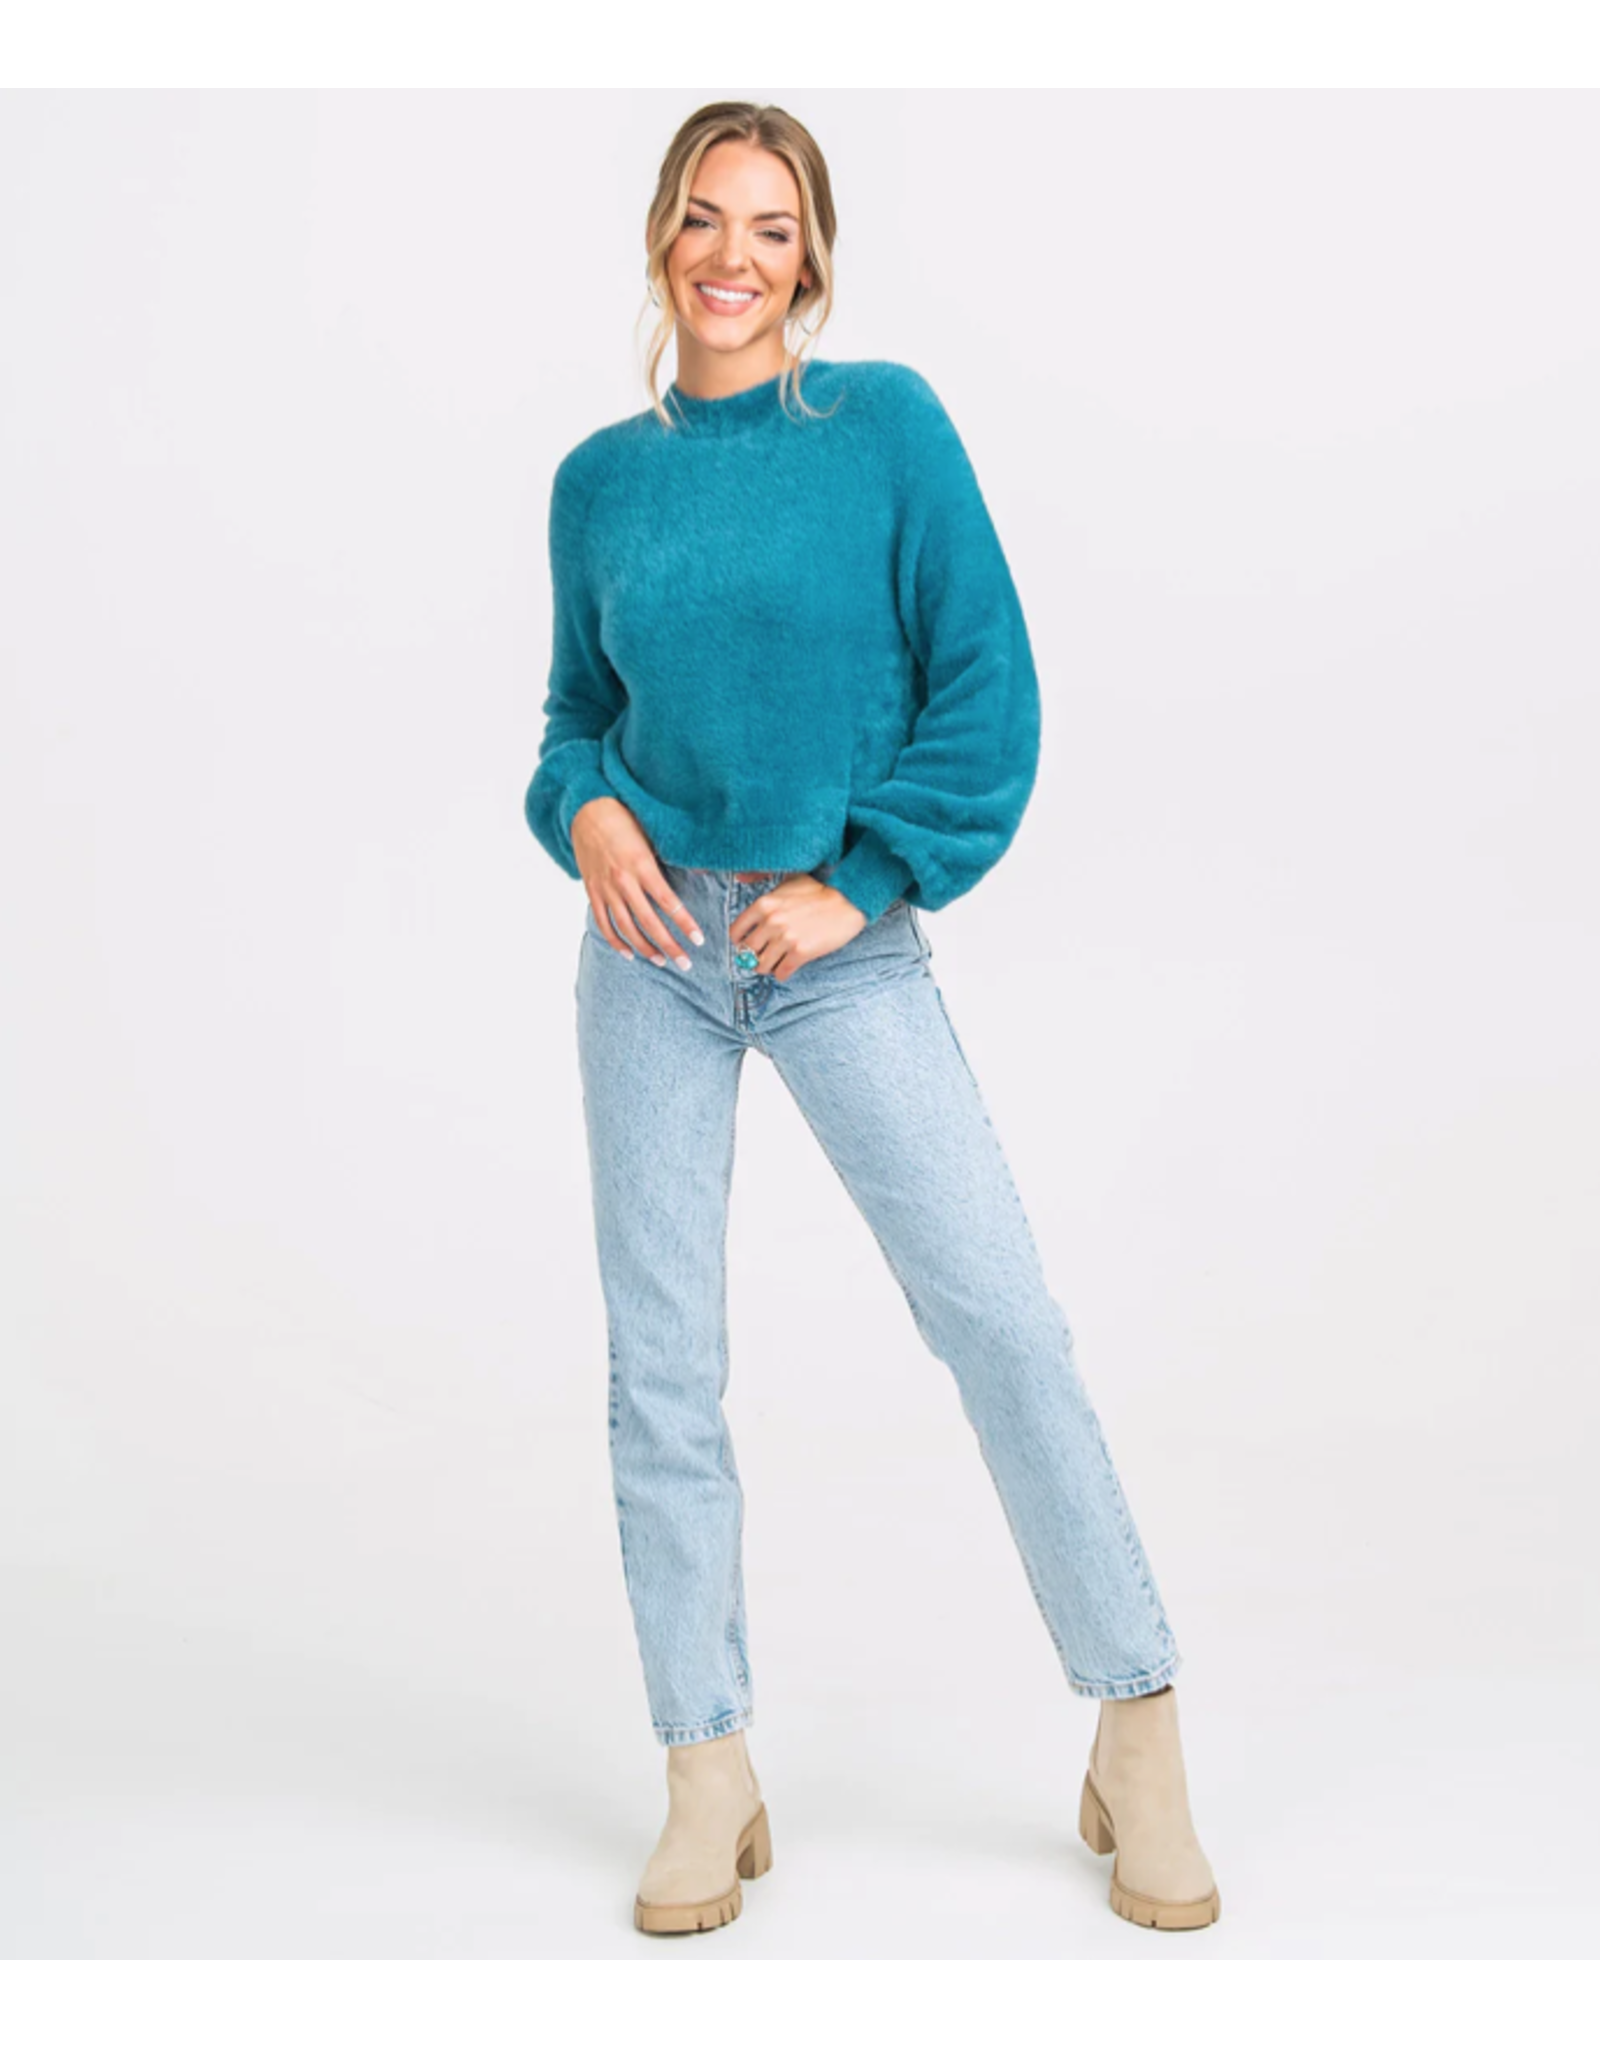 Southern Shirt Company Cropped Feather Knit Sweater Dragonfly